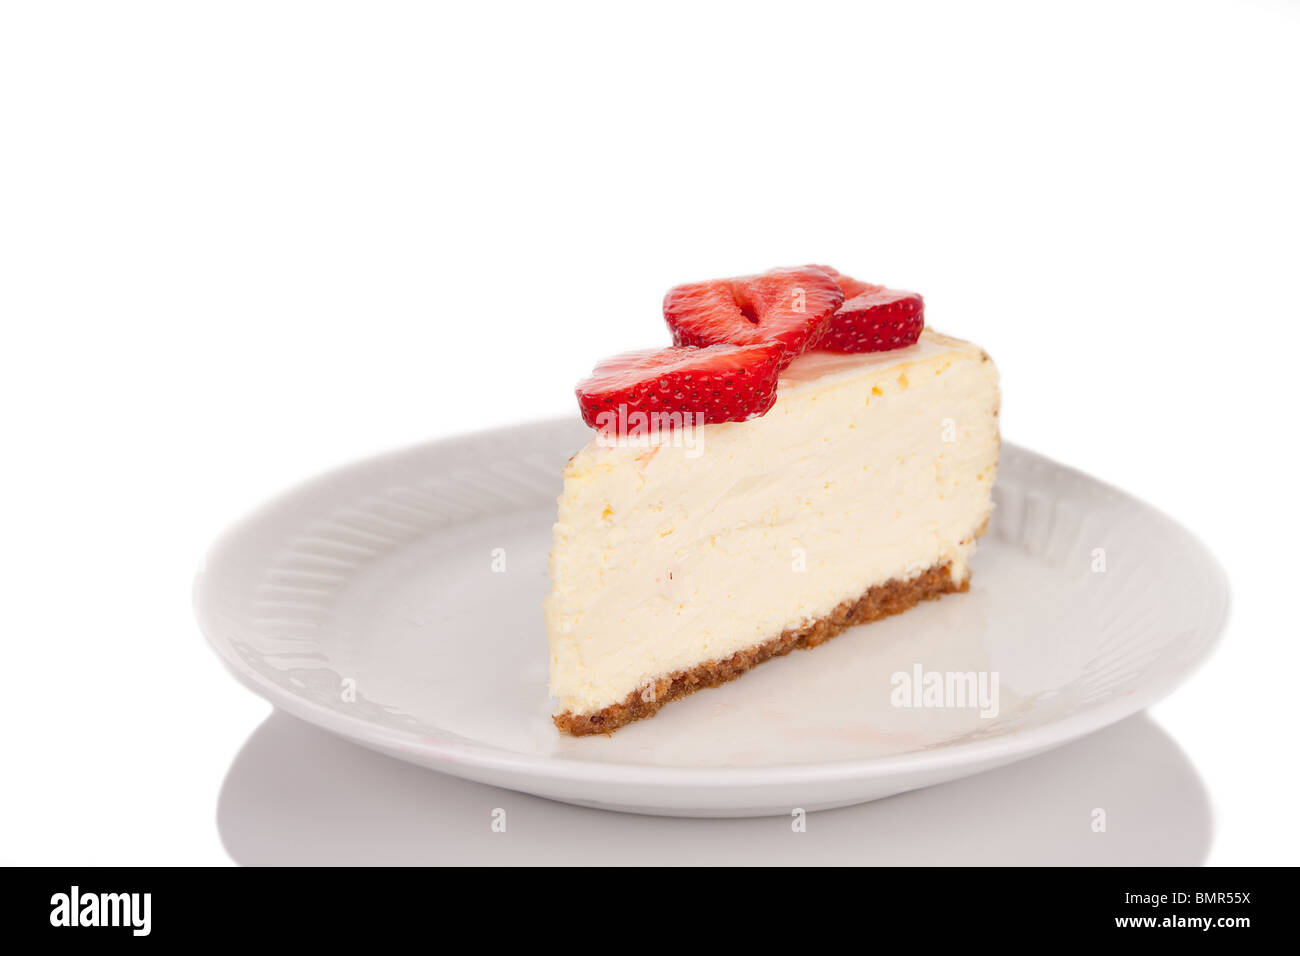 A slice of strawberry cheesecake on a white plate Stock Photo